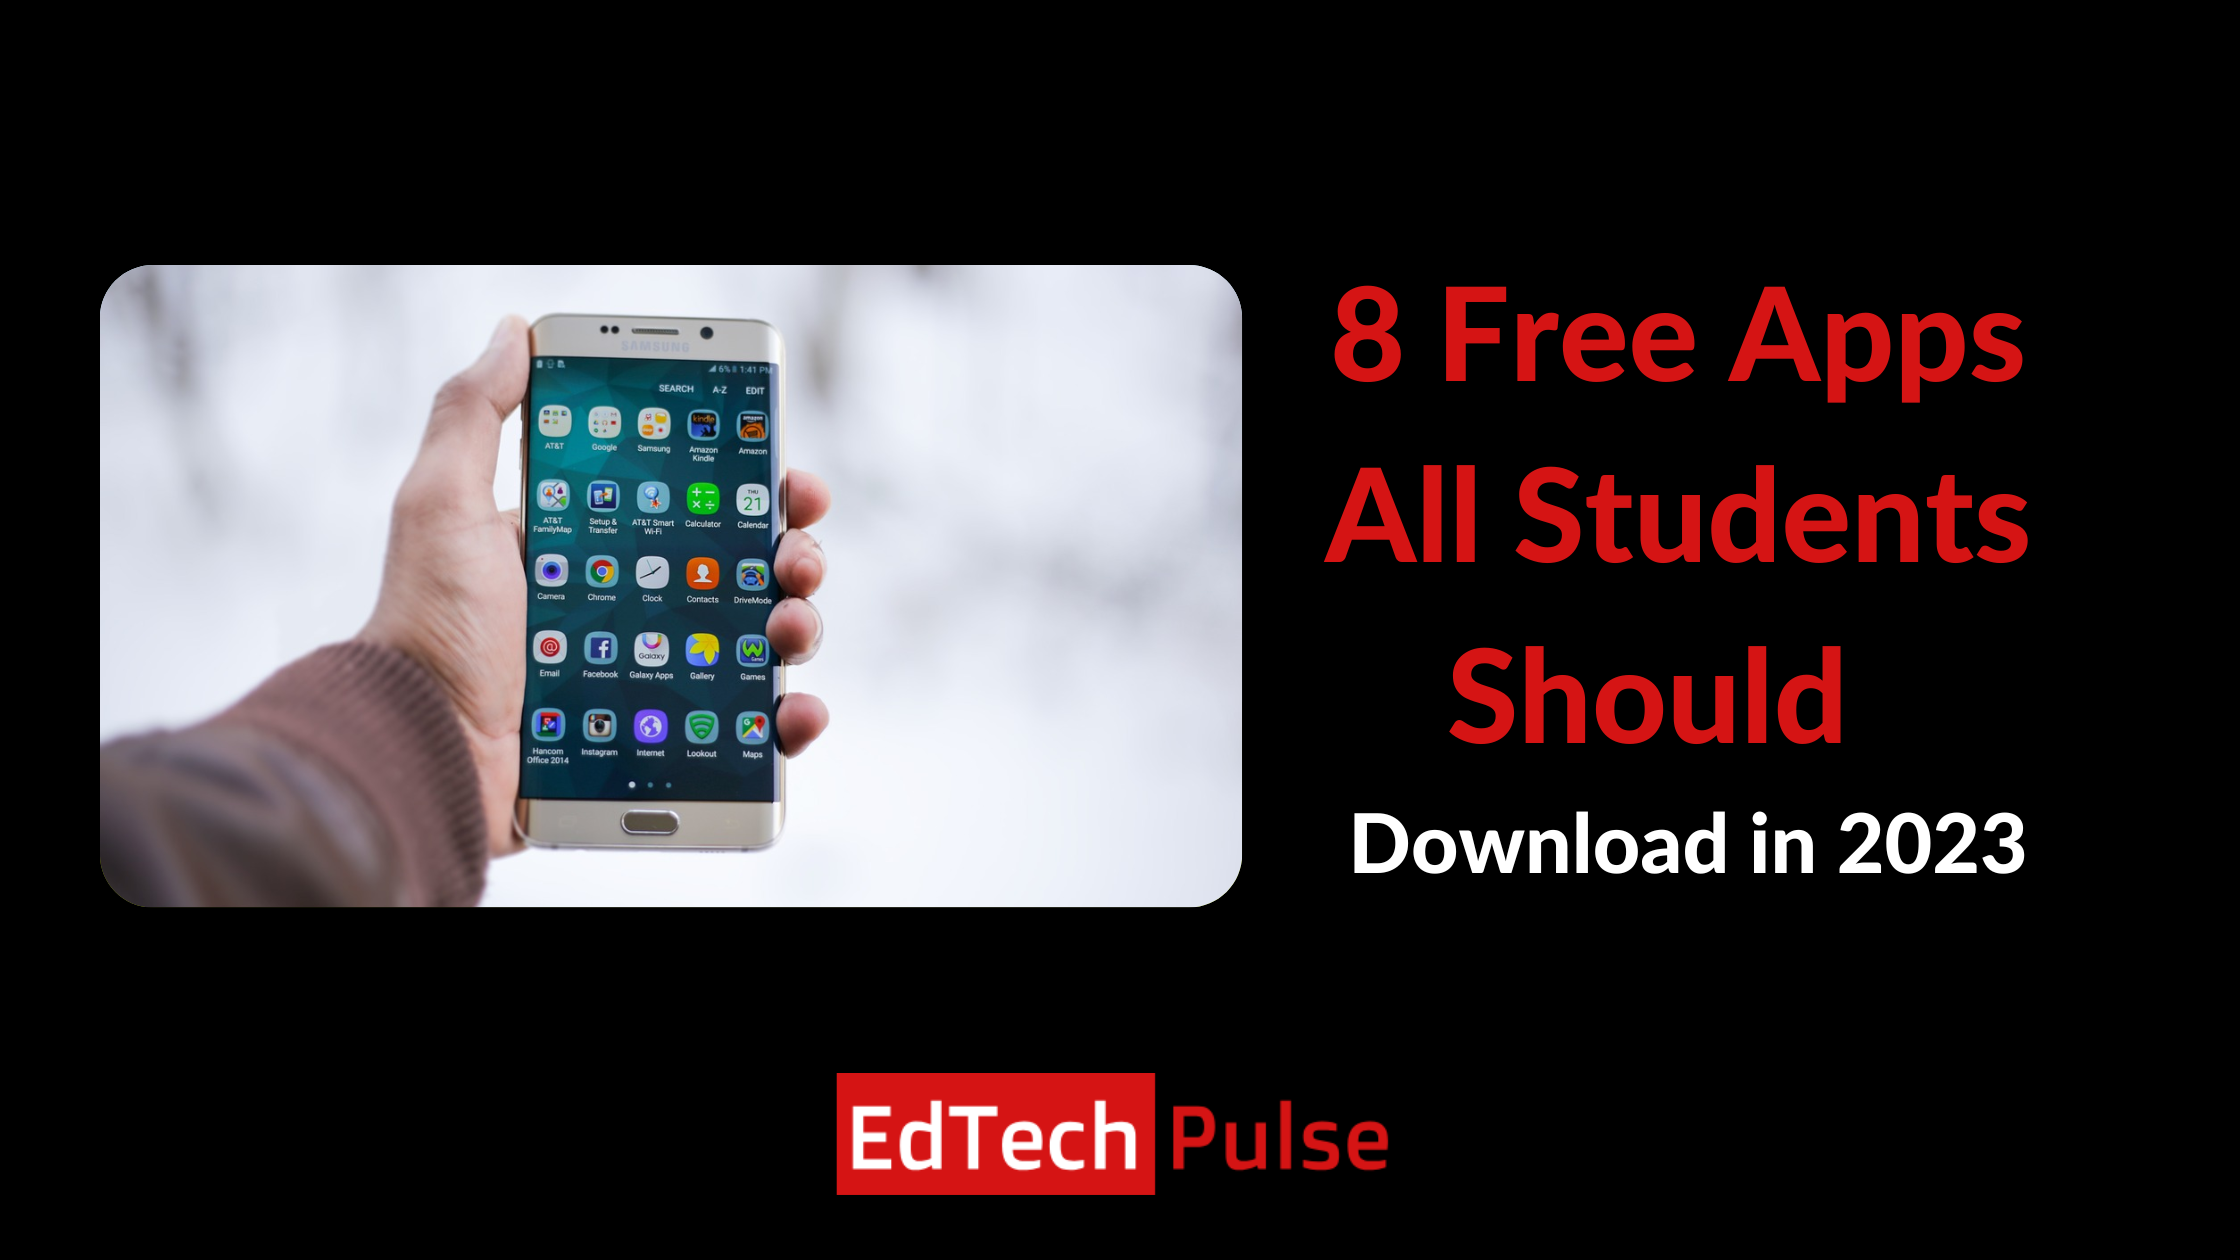 8 Free Apps All Students Should Download in 2023